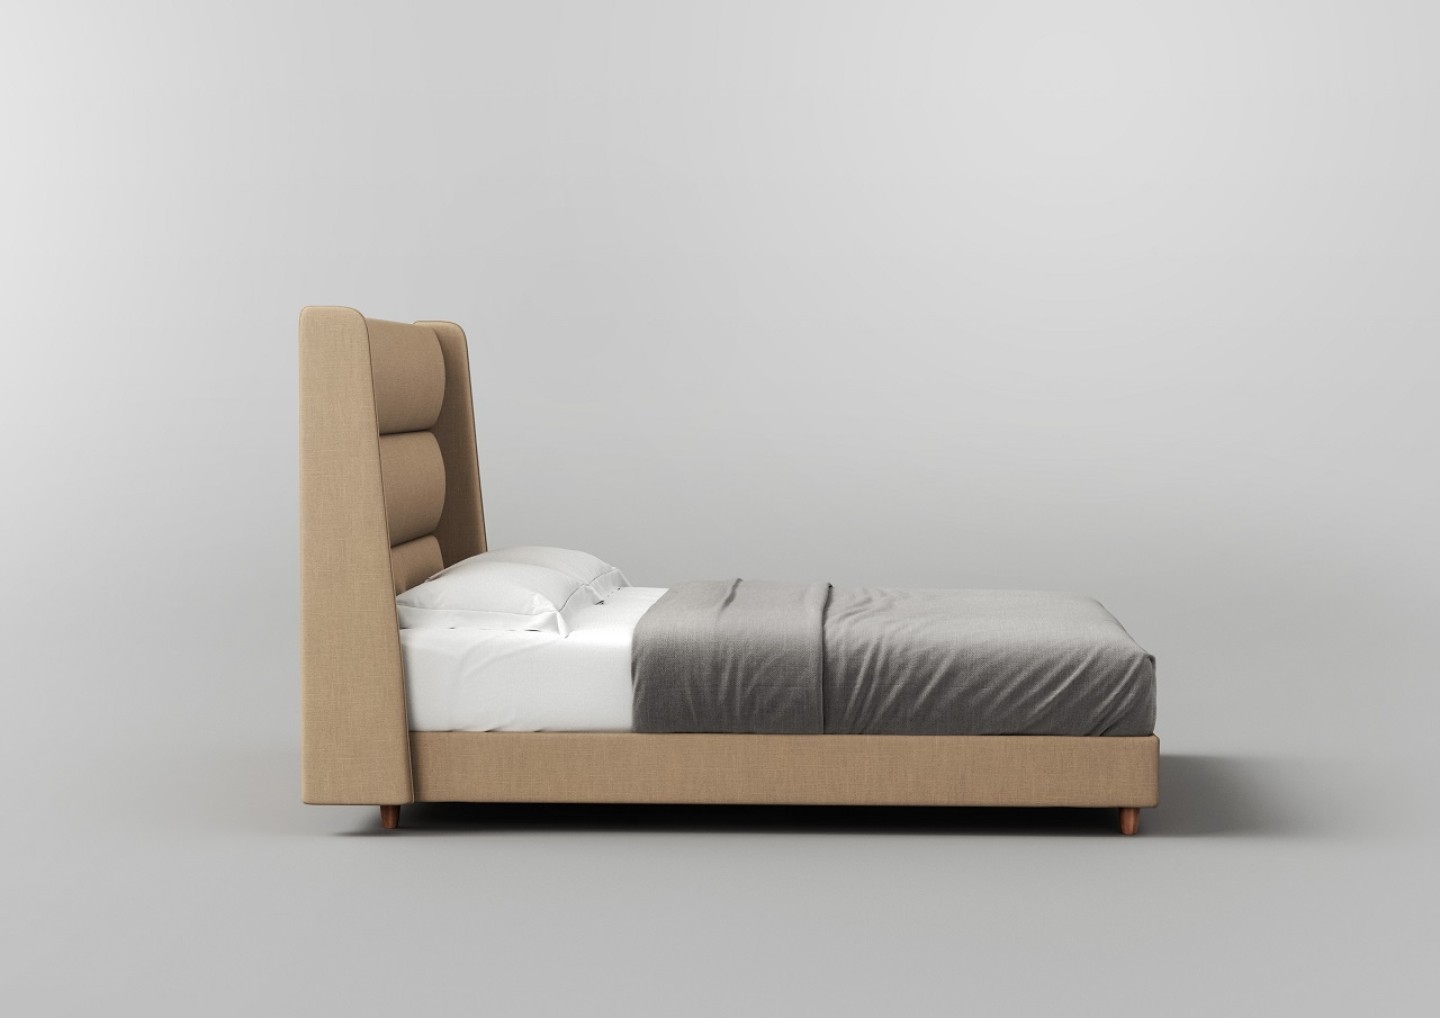 THE ARTY BED by Elite Strom